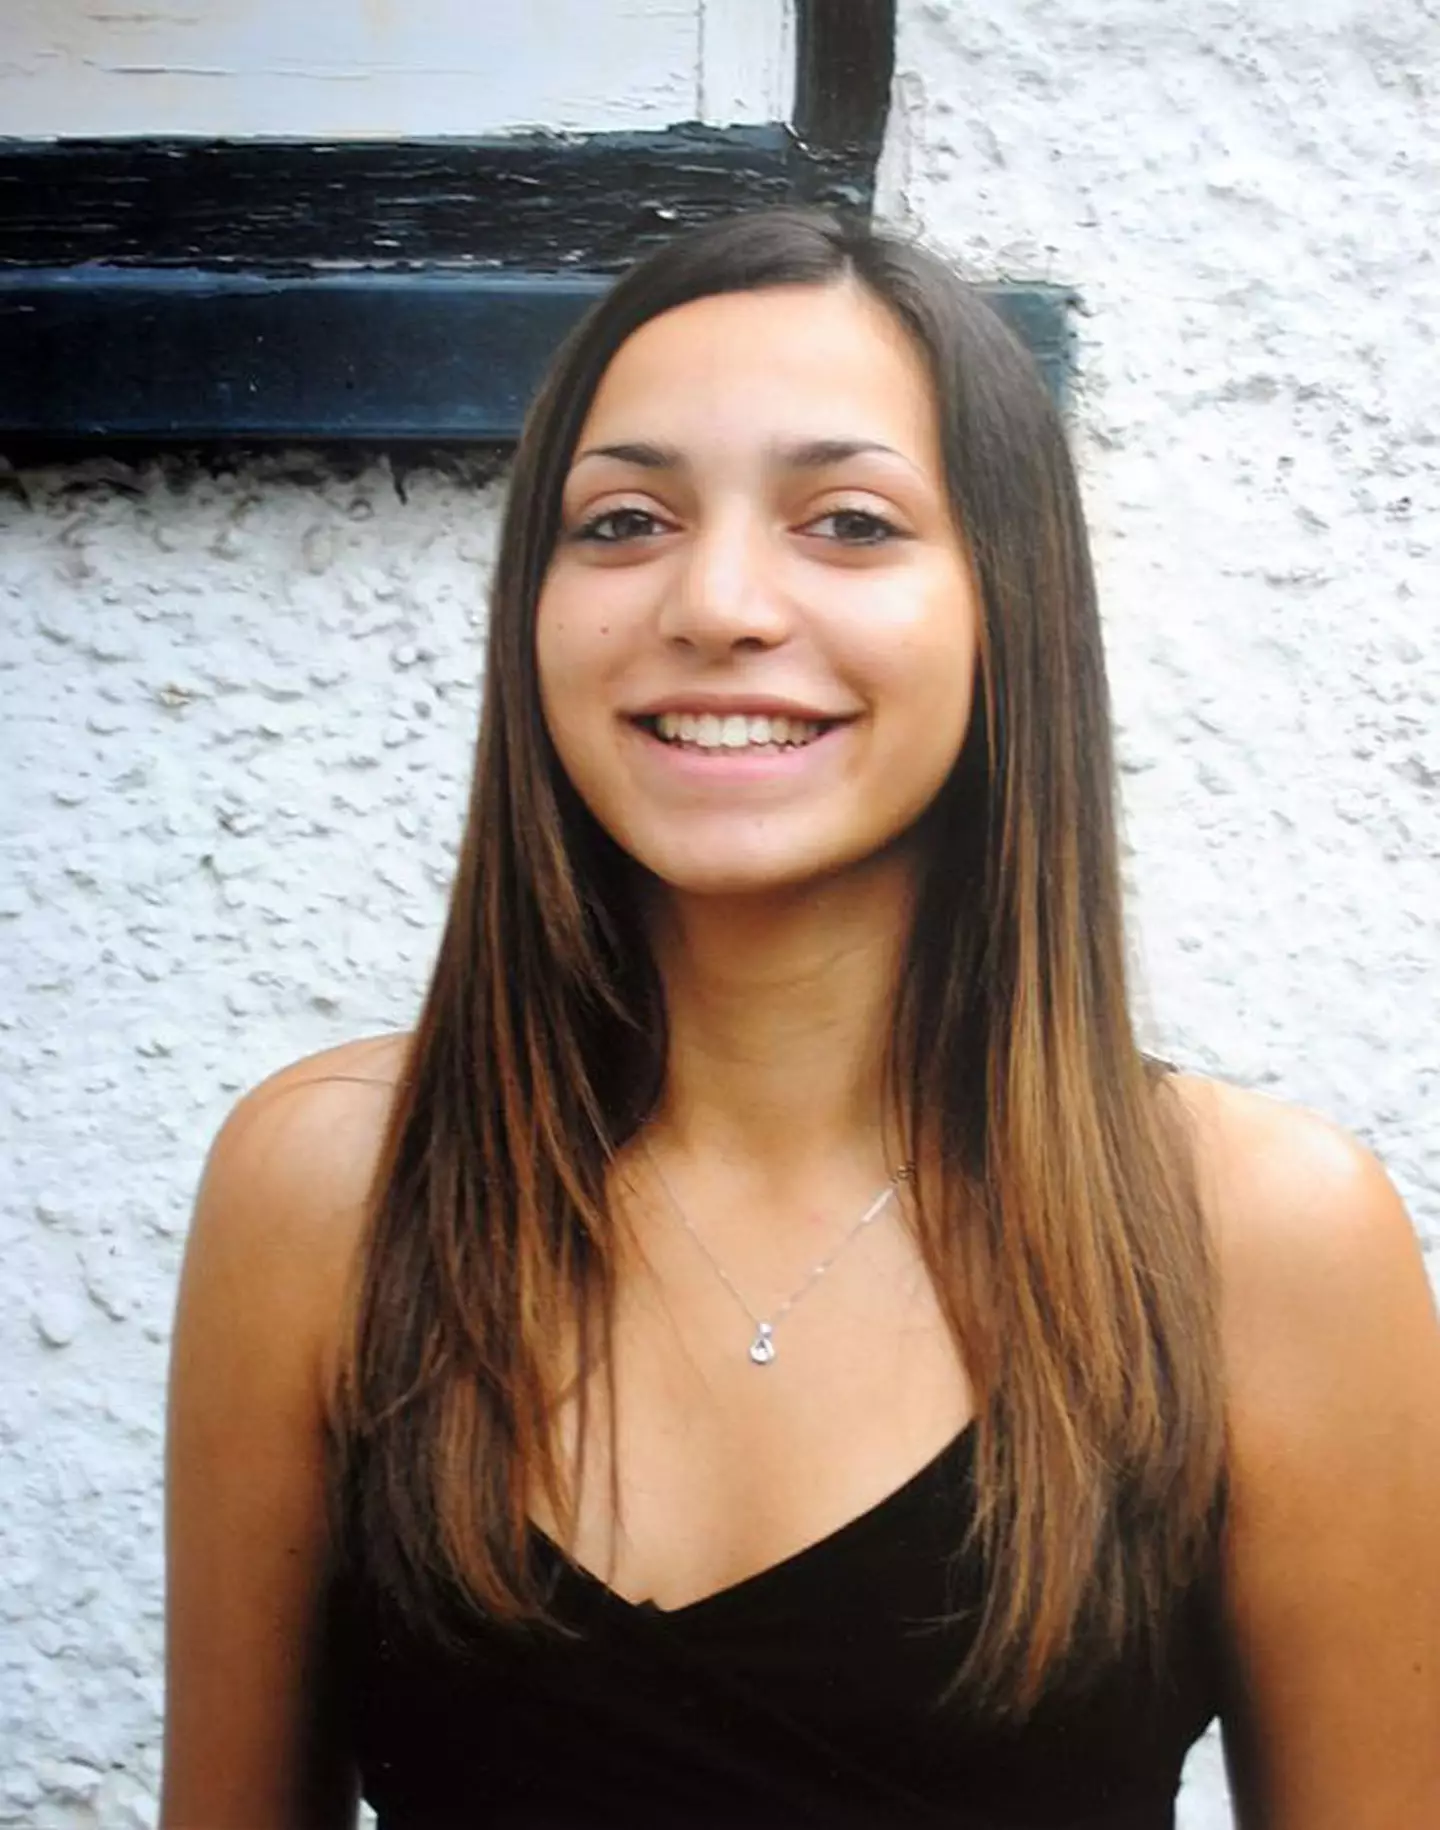 British student Meredith Kercher was murdered while studying in Italy.